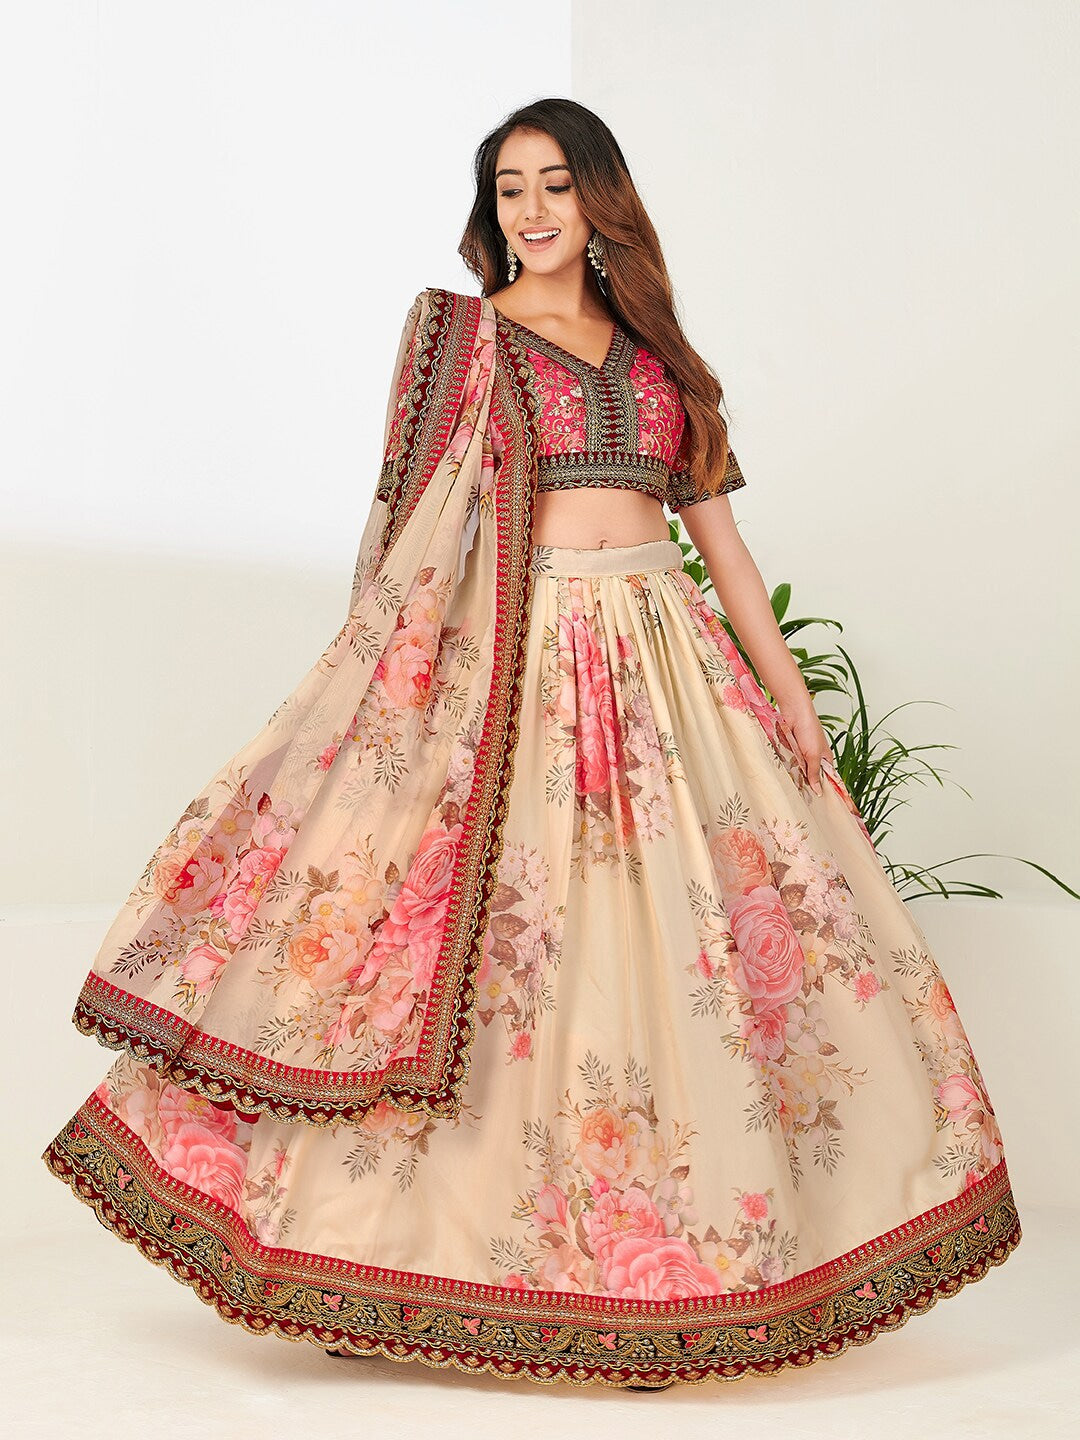 Floral Embroidered Lehenga - Indian Clothing in Denver, CO, Aurora, CO, Boulder, CO, Fort Collins, CO, Colorado Springs, CO, Parker, CO, Highlands Ranch, CO, Cherry Creek, CO, Centennial, CO, and Longmont, CO. Nationwide shipping USA - India Fashion X